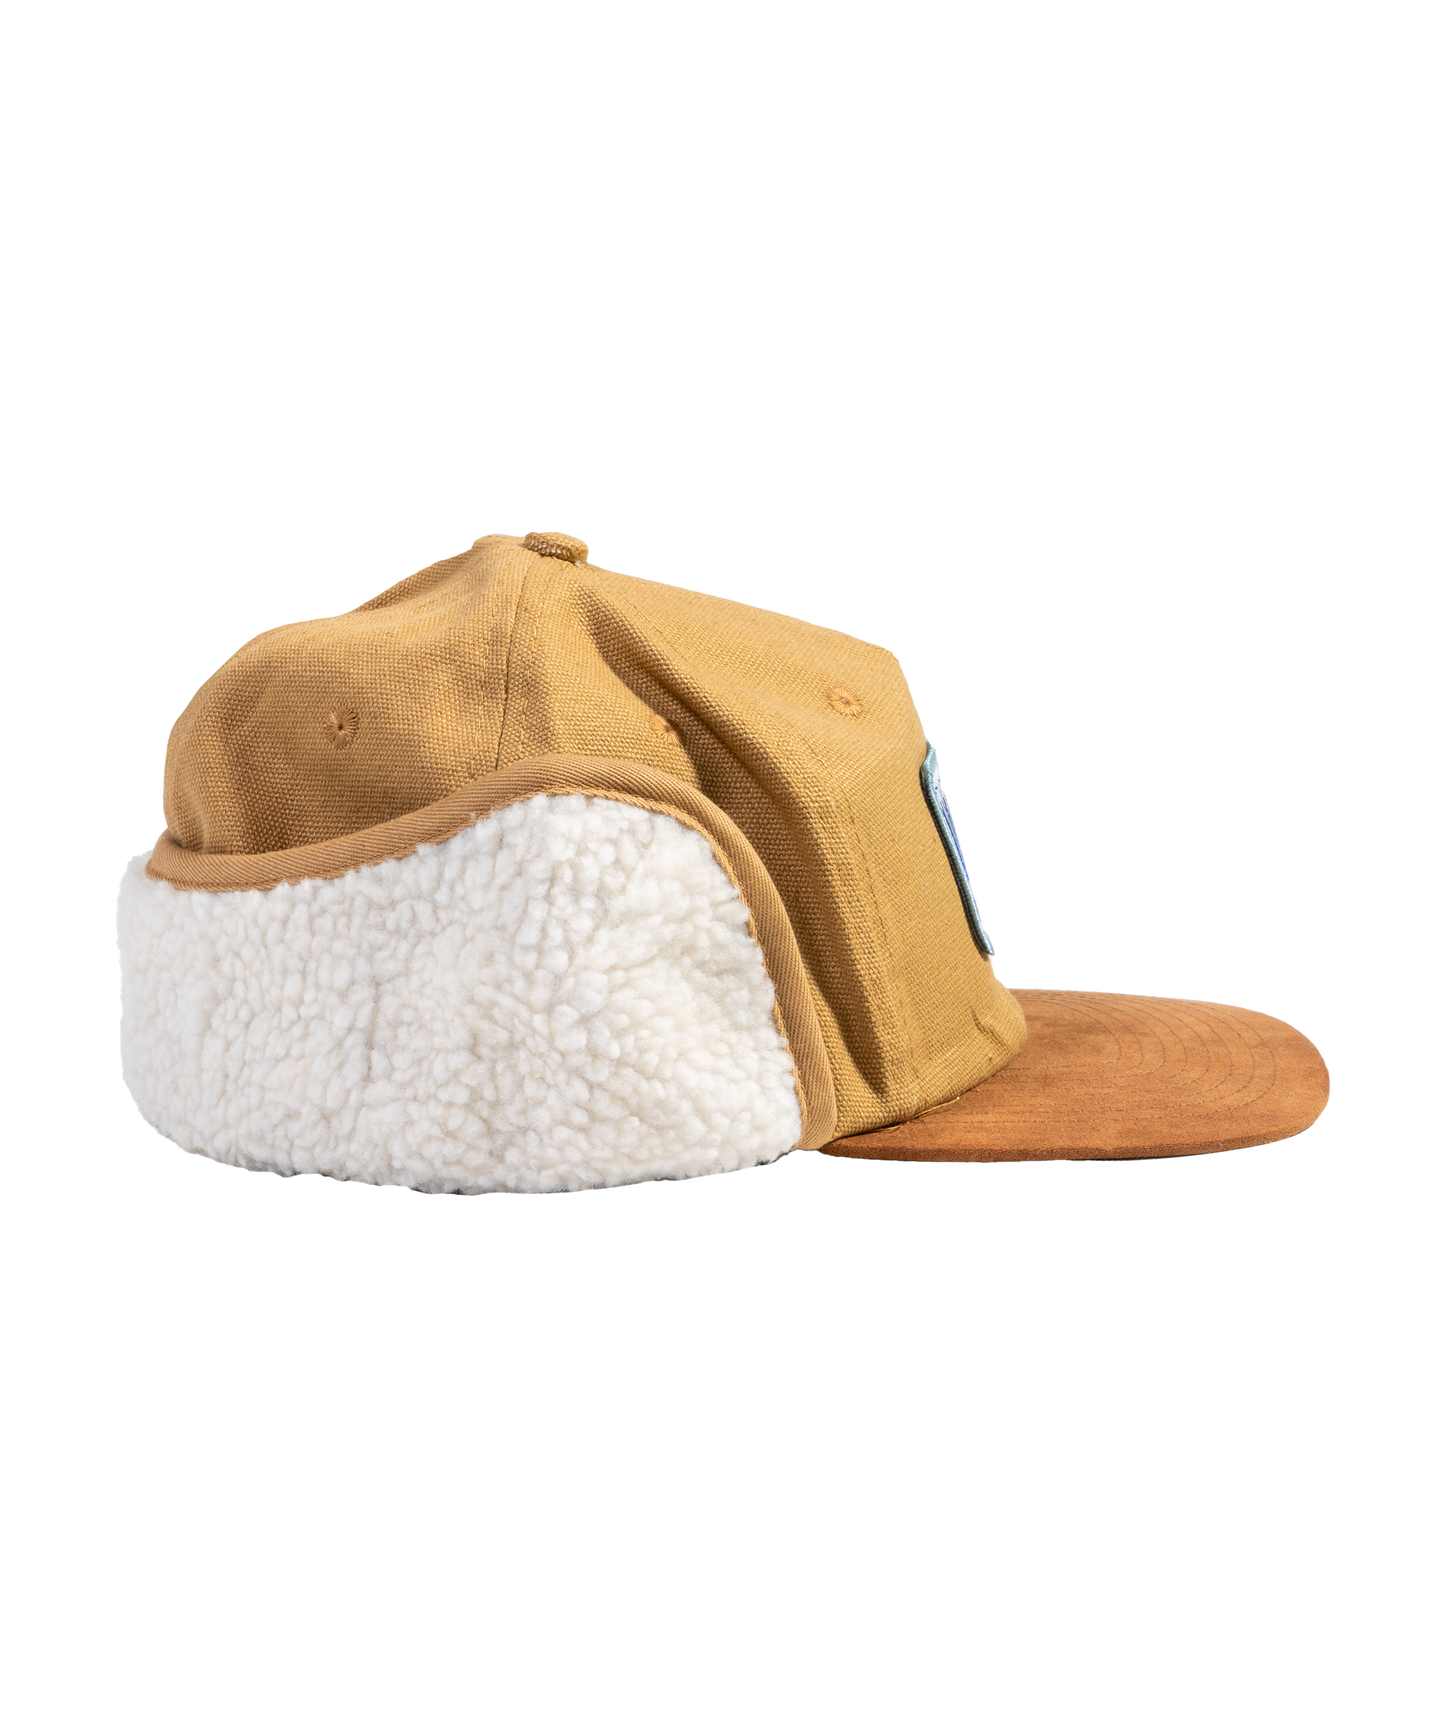 Wilco Snow and Ice Removal Flapjack Hat • Wilco x Oxford Pennant